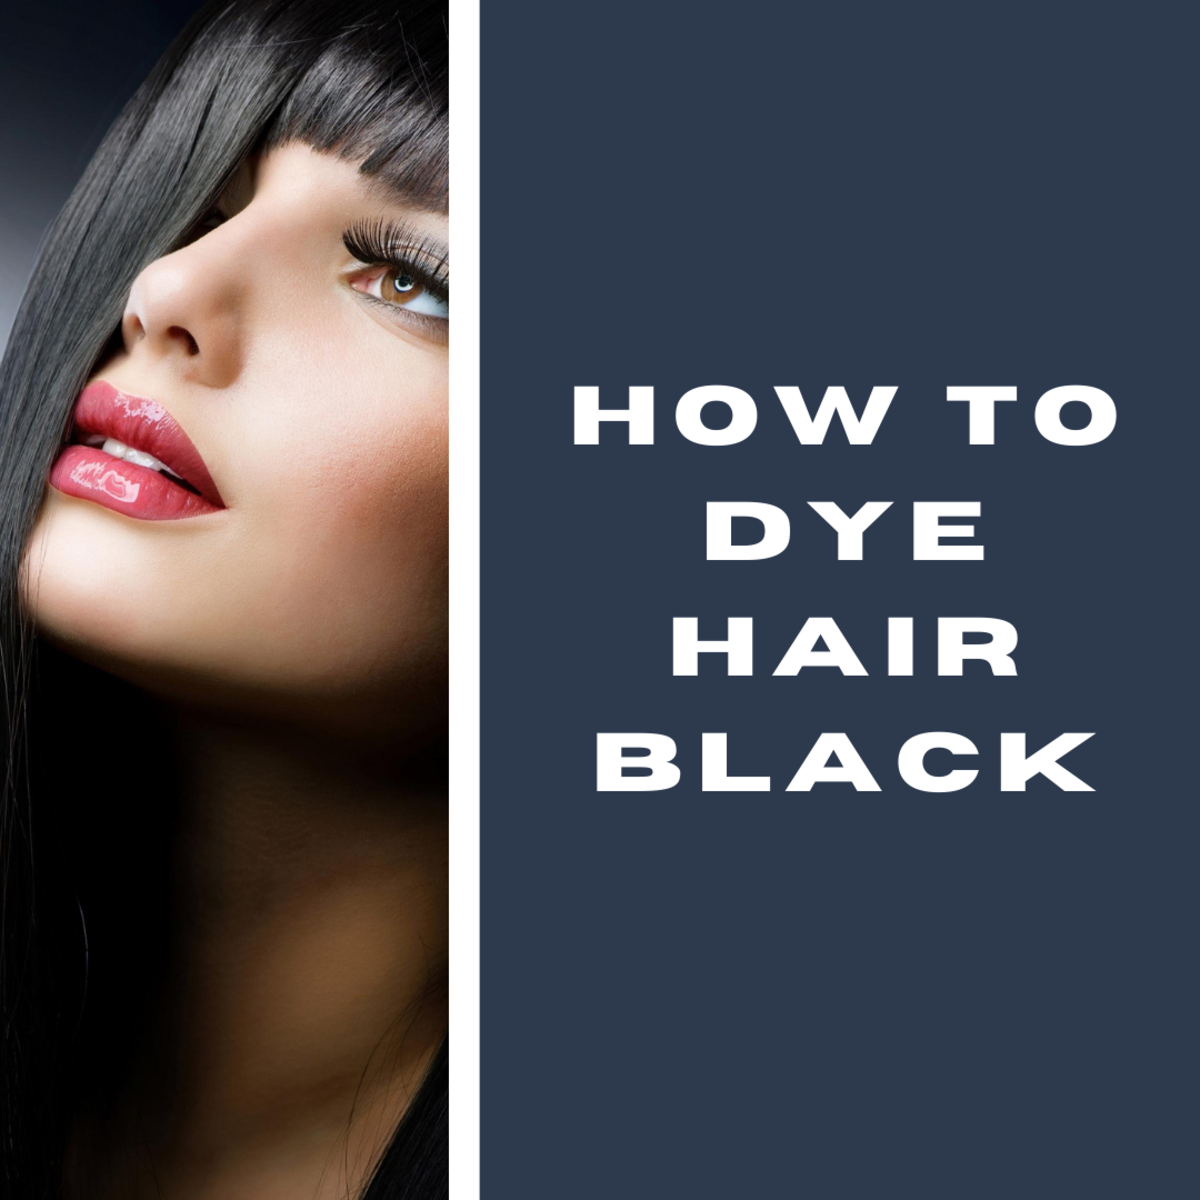 How to Dye Your Hair Black